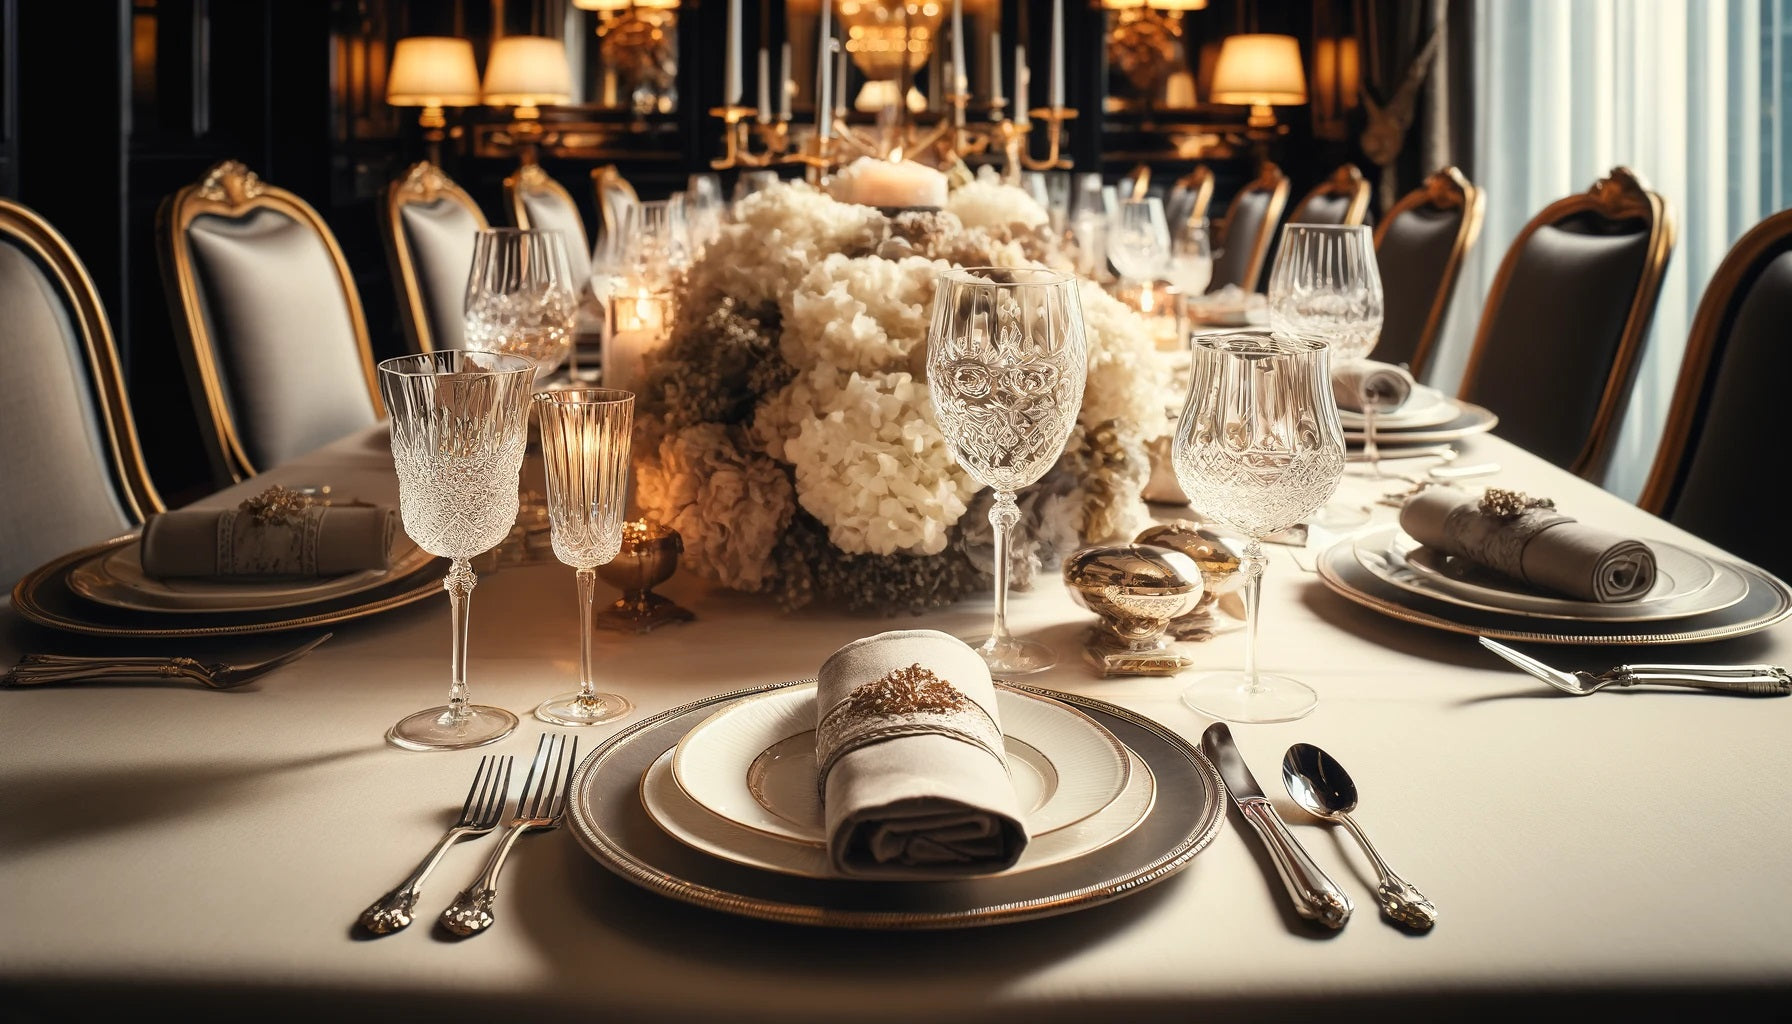 A luxurious dining table setup with elegant tableware, including fine china, polished silverware, crystal glasses.